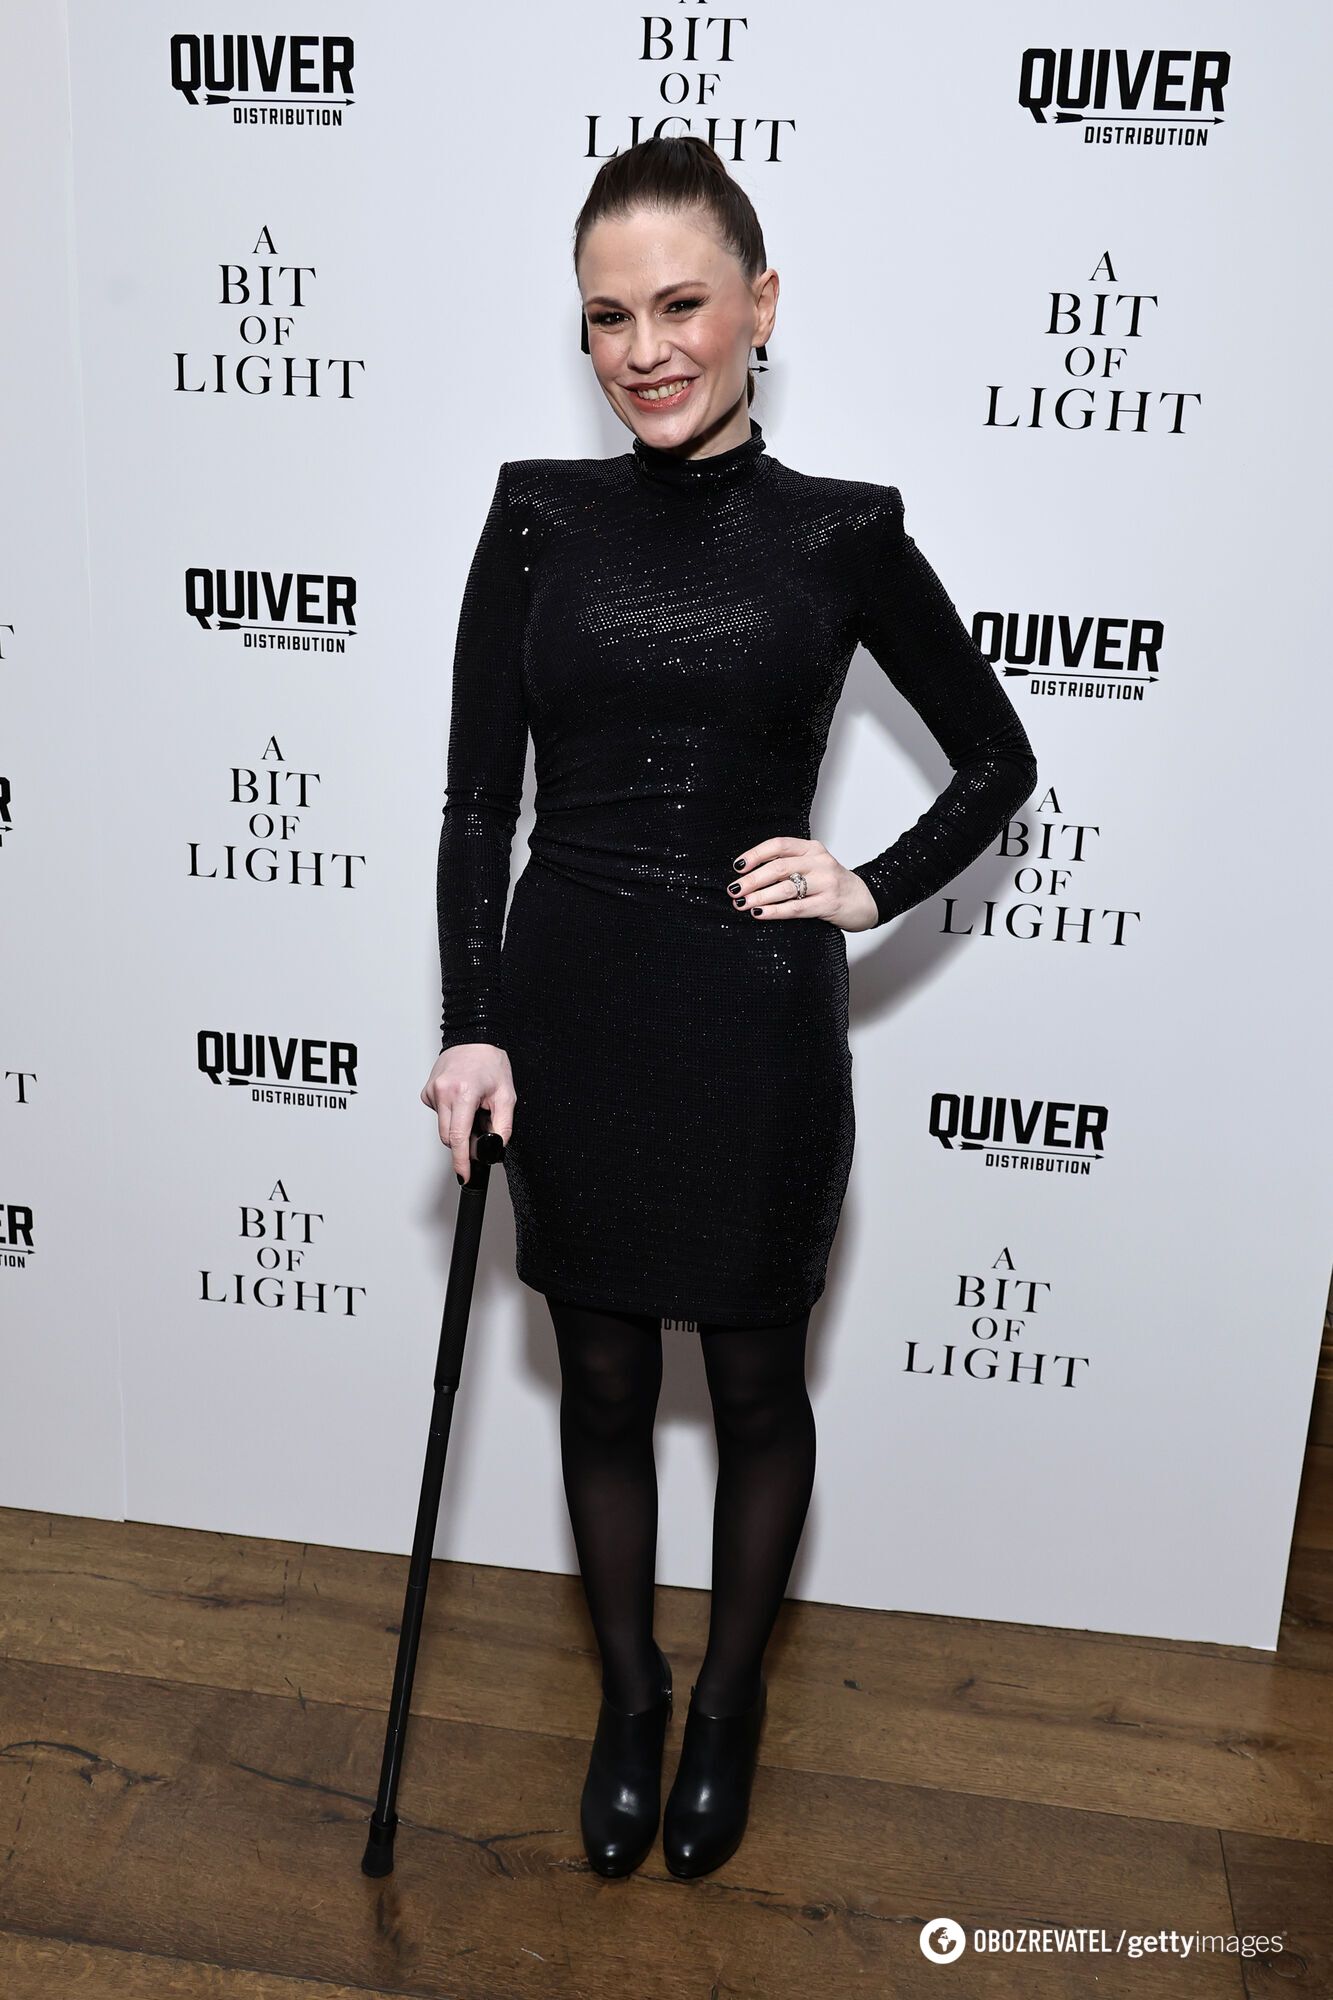 The 41-year-old Oscar-winning actress went out with a cane due to health problems